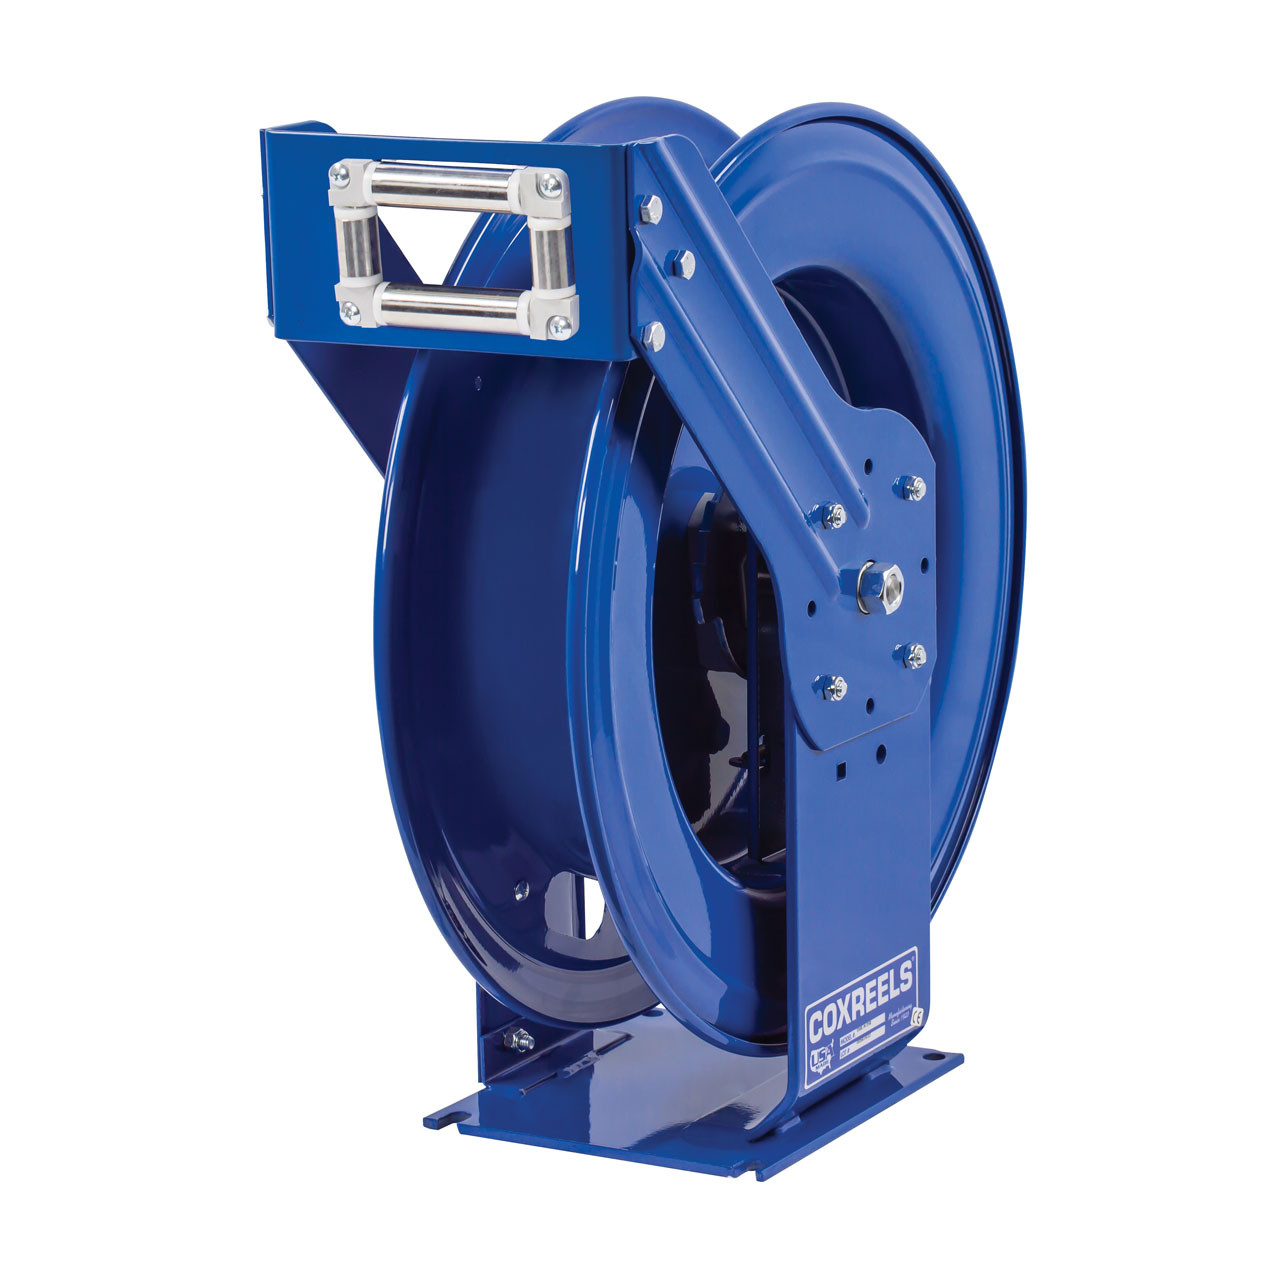 Coxreels SGW Series Side Mount Low Pressure Spring Driven Hose Reels